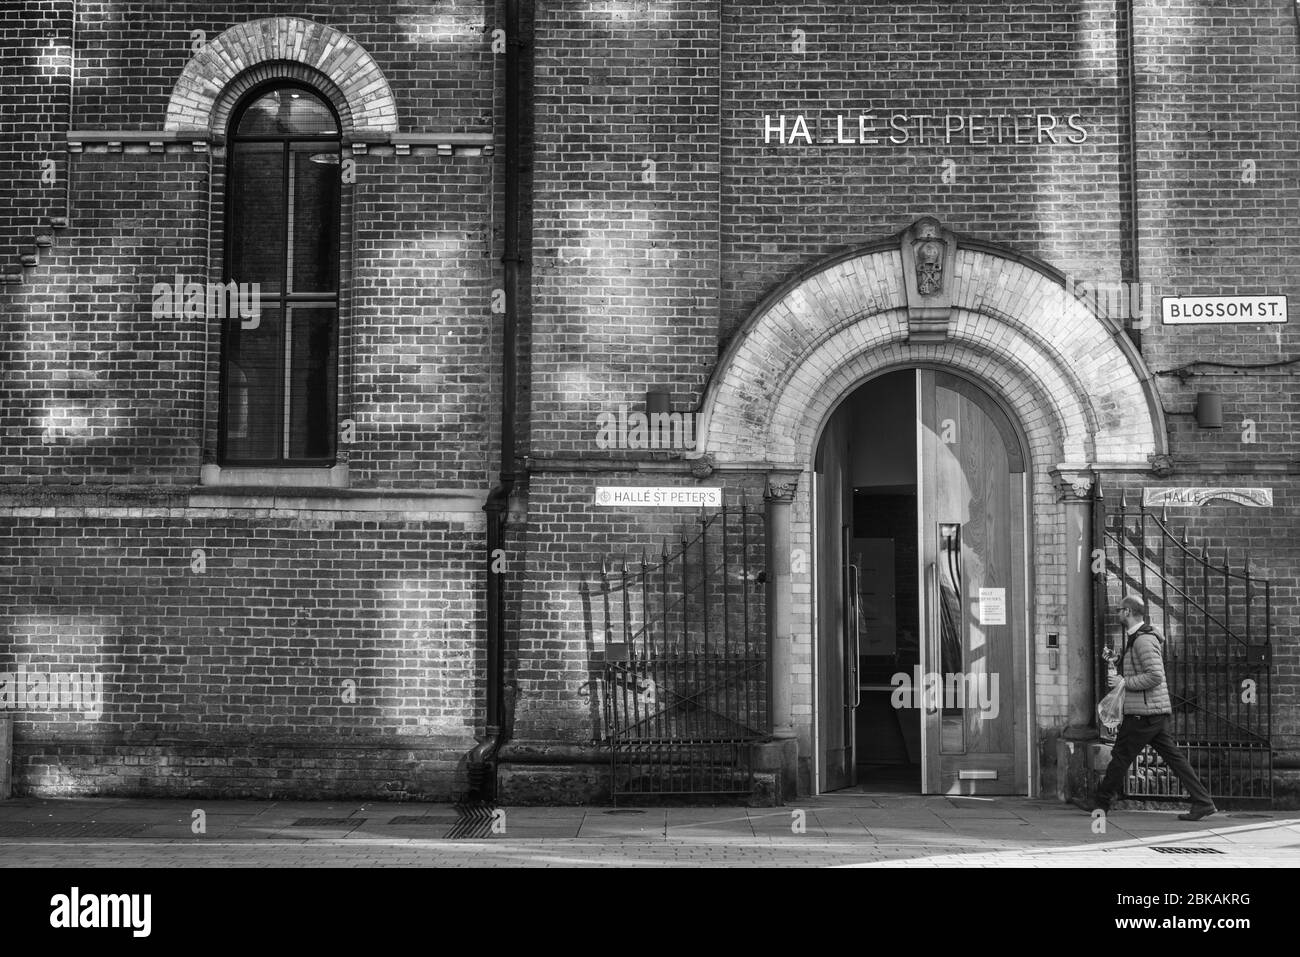 The Halle St. Peters, Ancoats, Manchester. Stock Photo